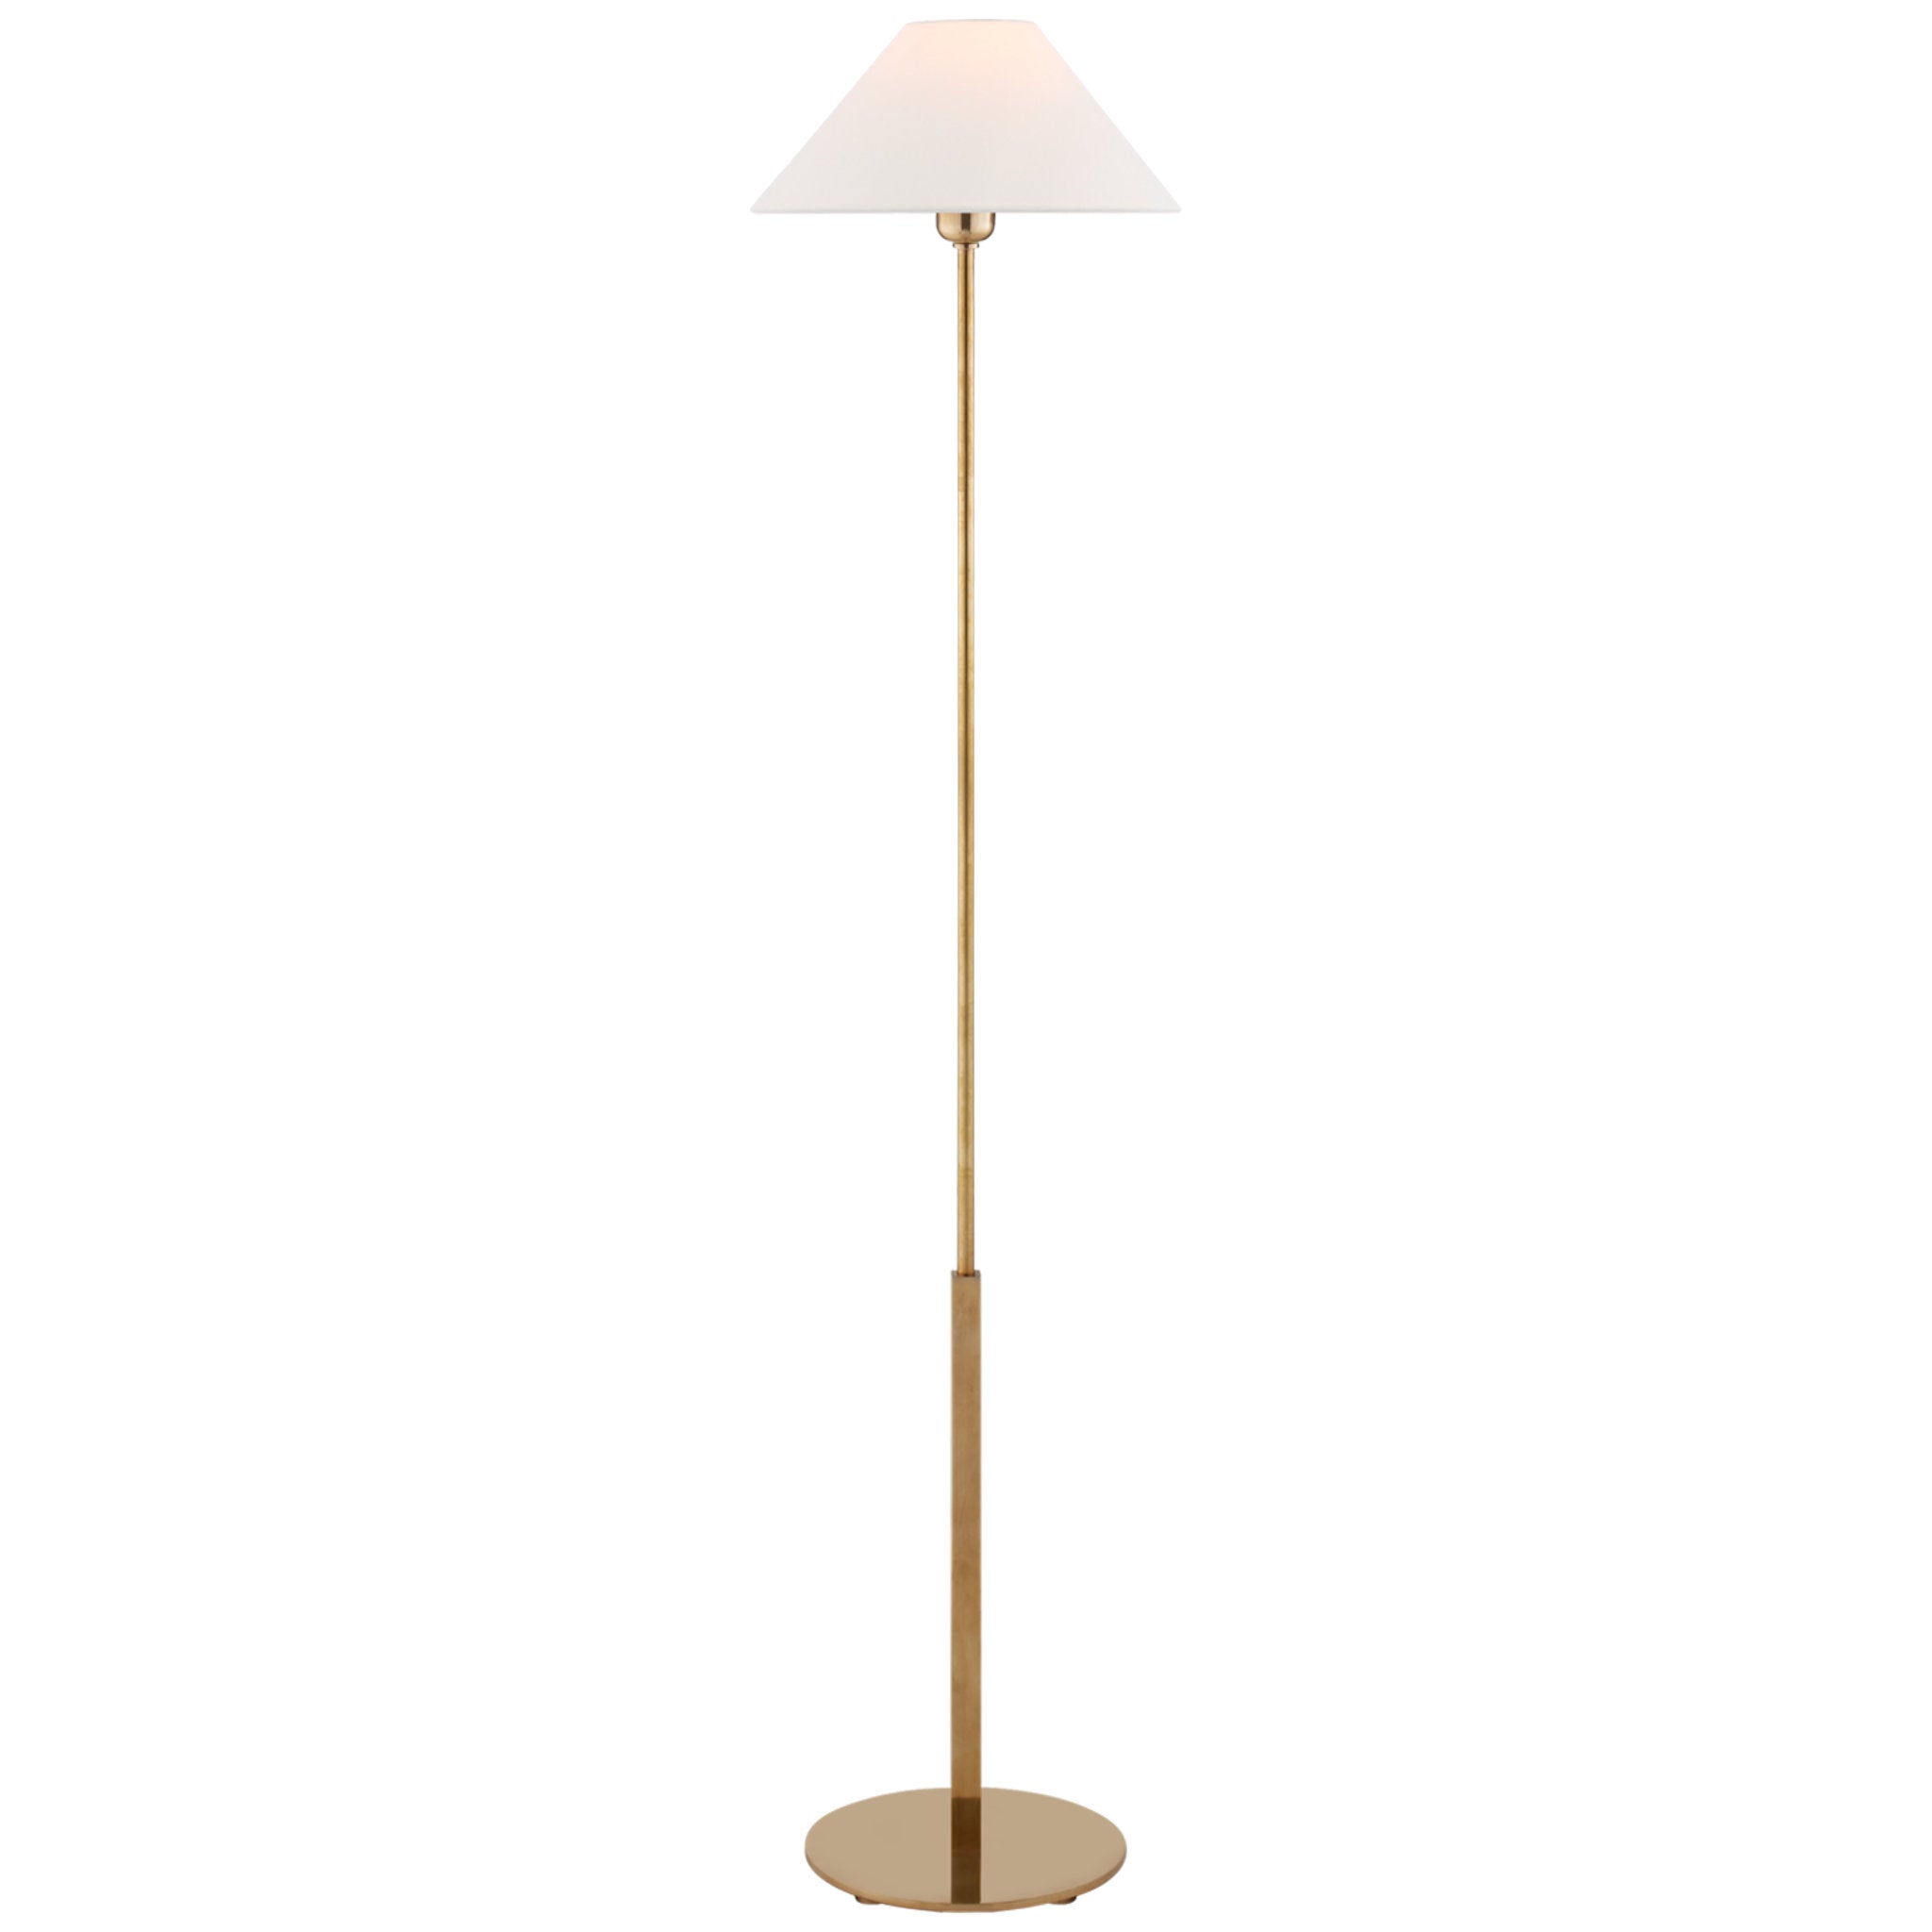 J. Randall Powers Hackney Floor Lamp in Hand-Rubbed Antique Brass with Linen Shade